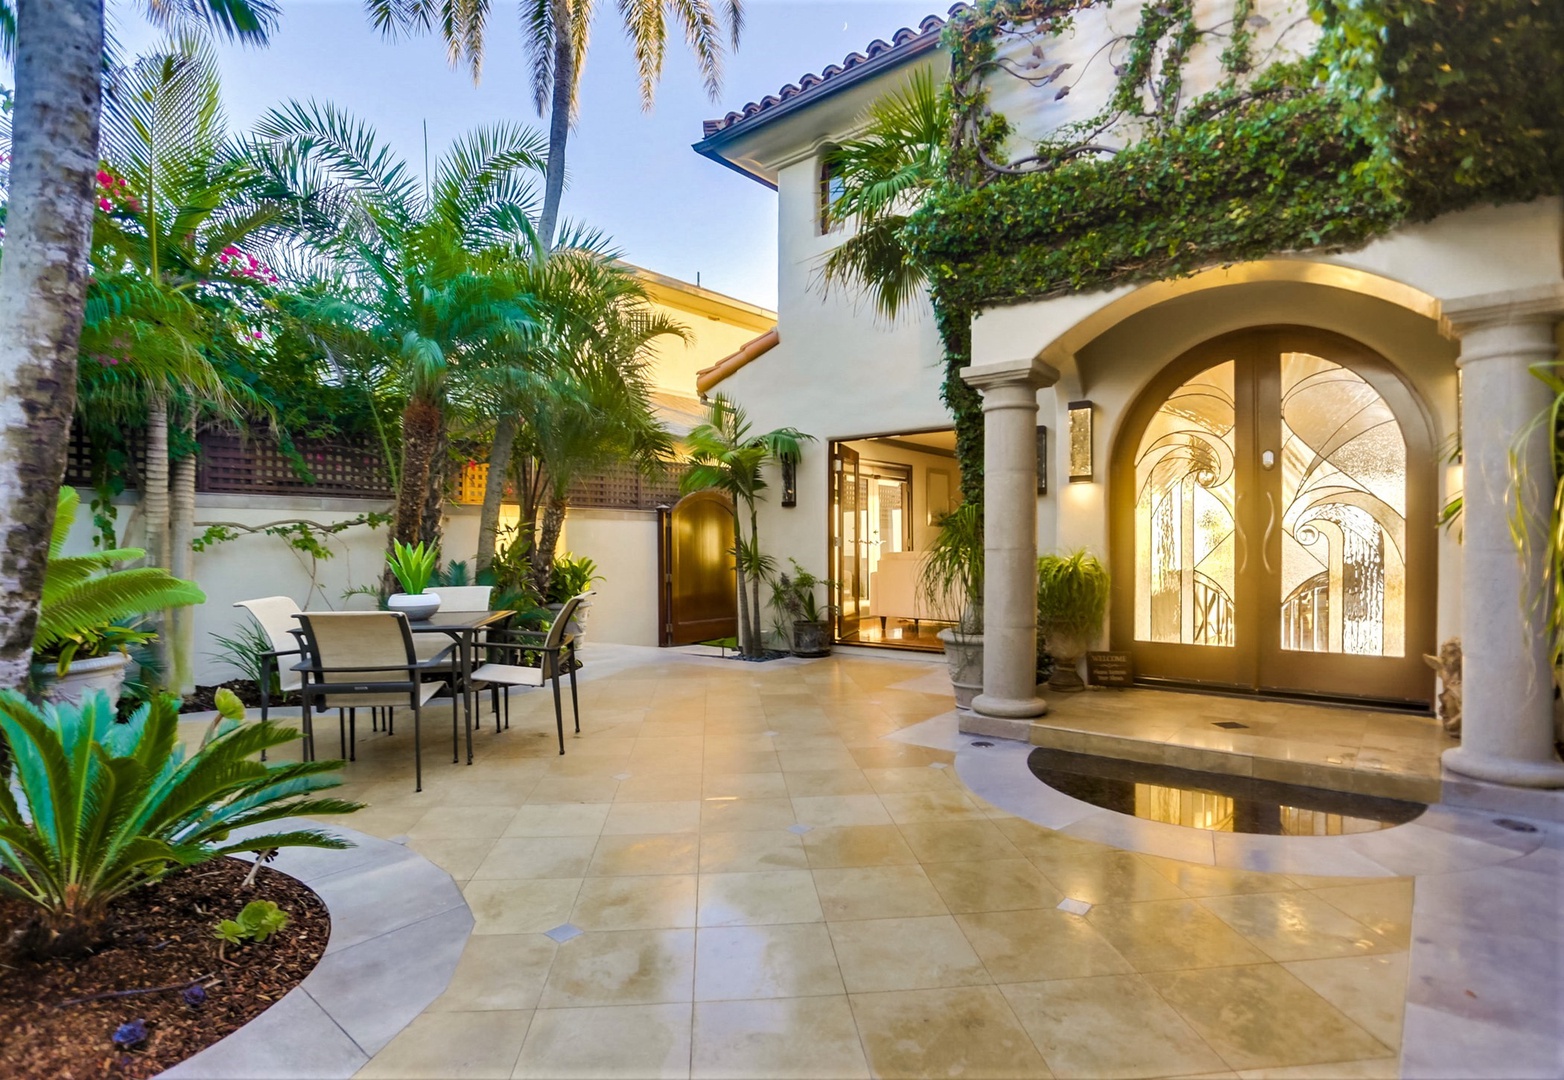 Gated courtyard and entryway